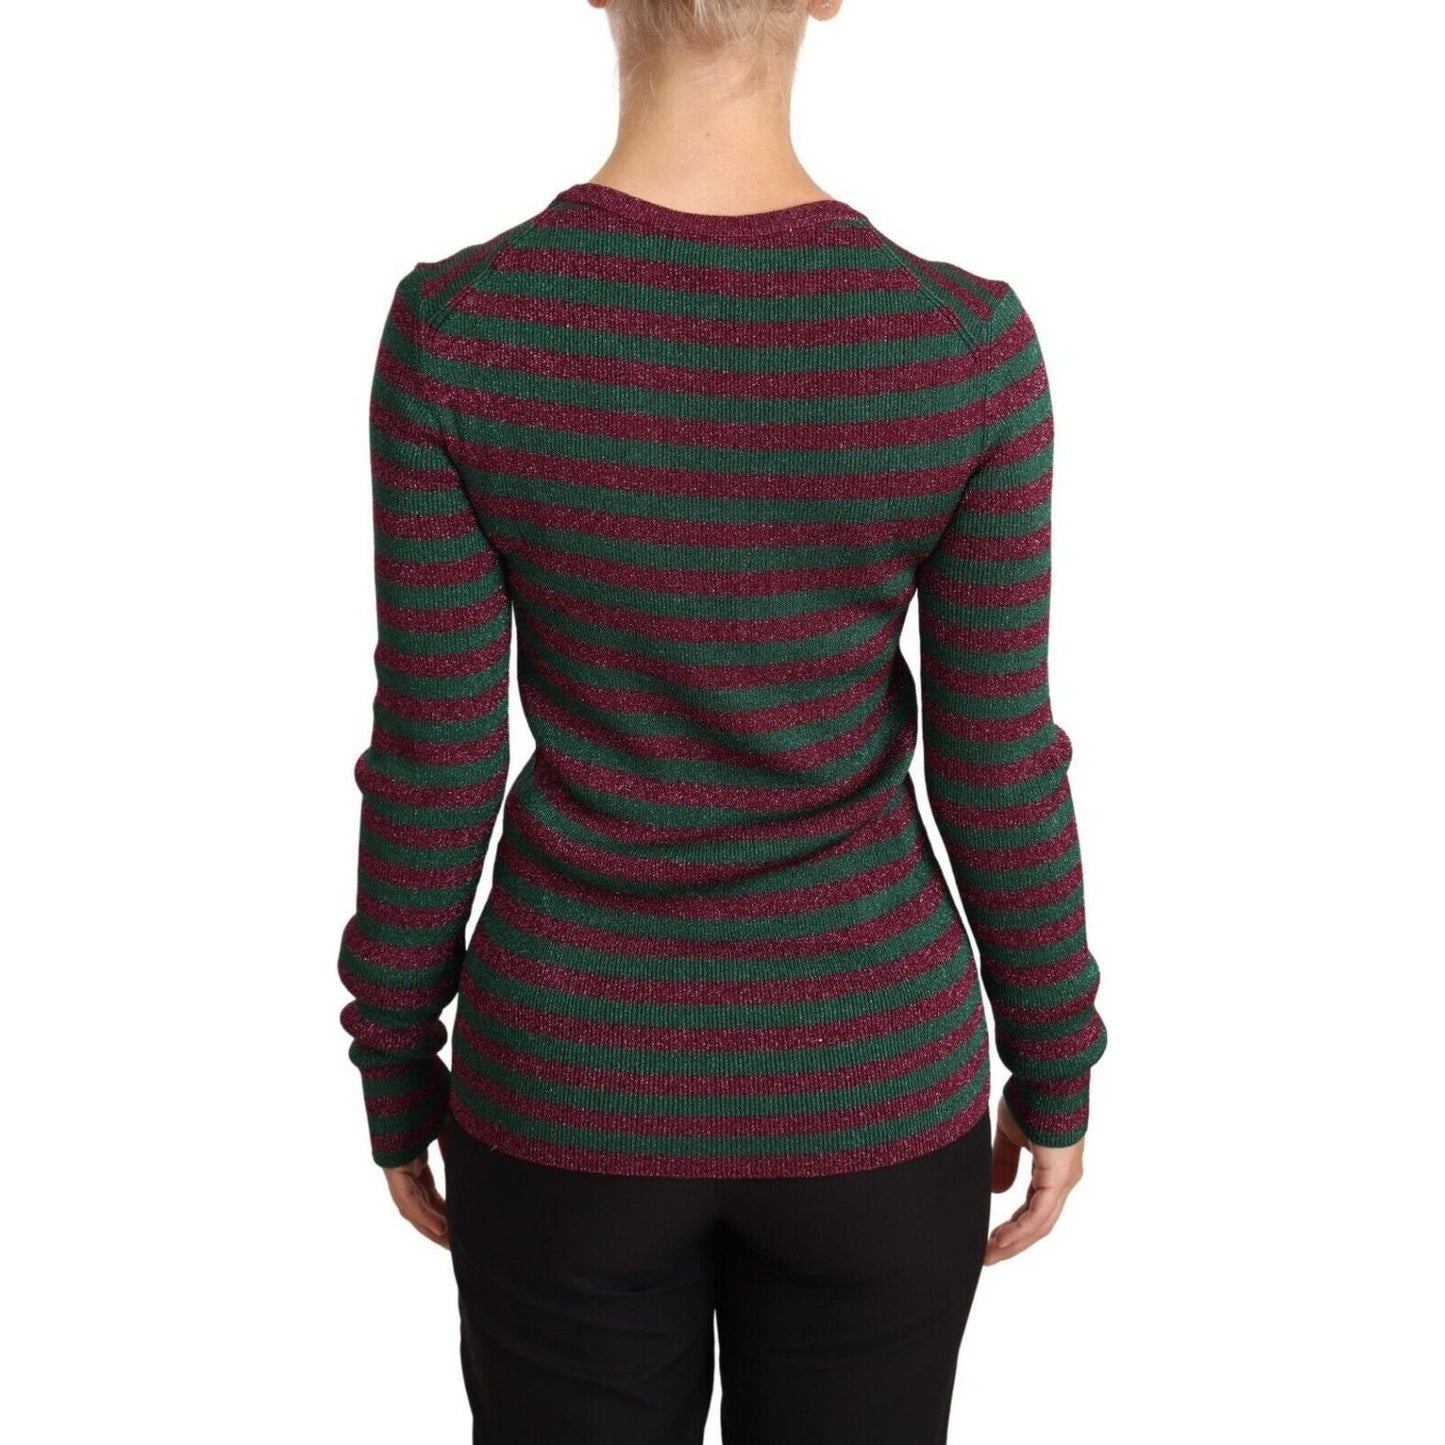 Dolce & Gabbana Elegant Maroon and Green Striped Crewneck Sweater WOMAN SWEATERS multicolor-striped-crew-neck-pullover-sweater